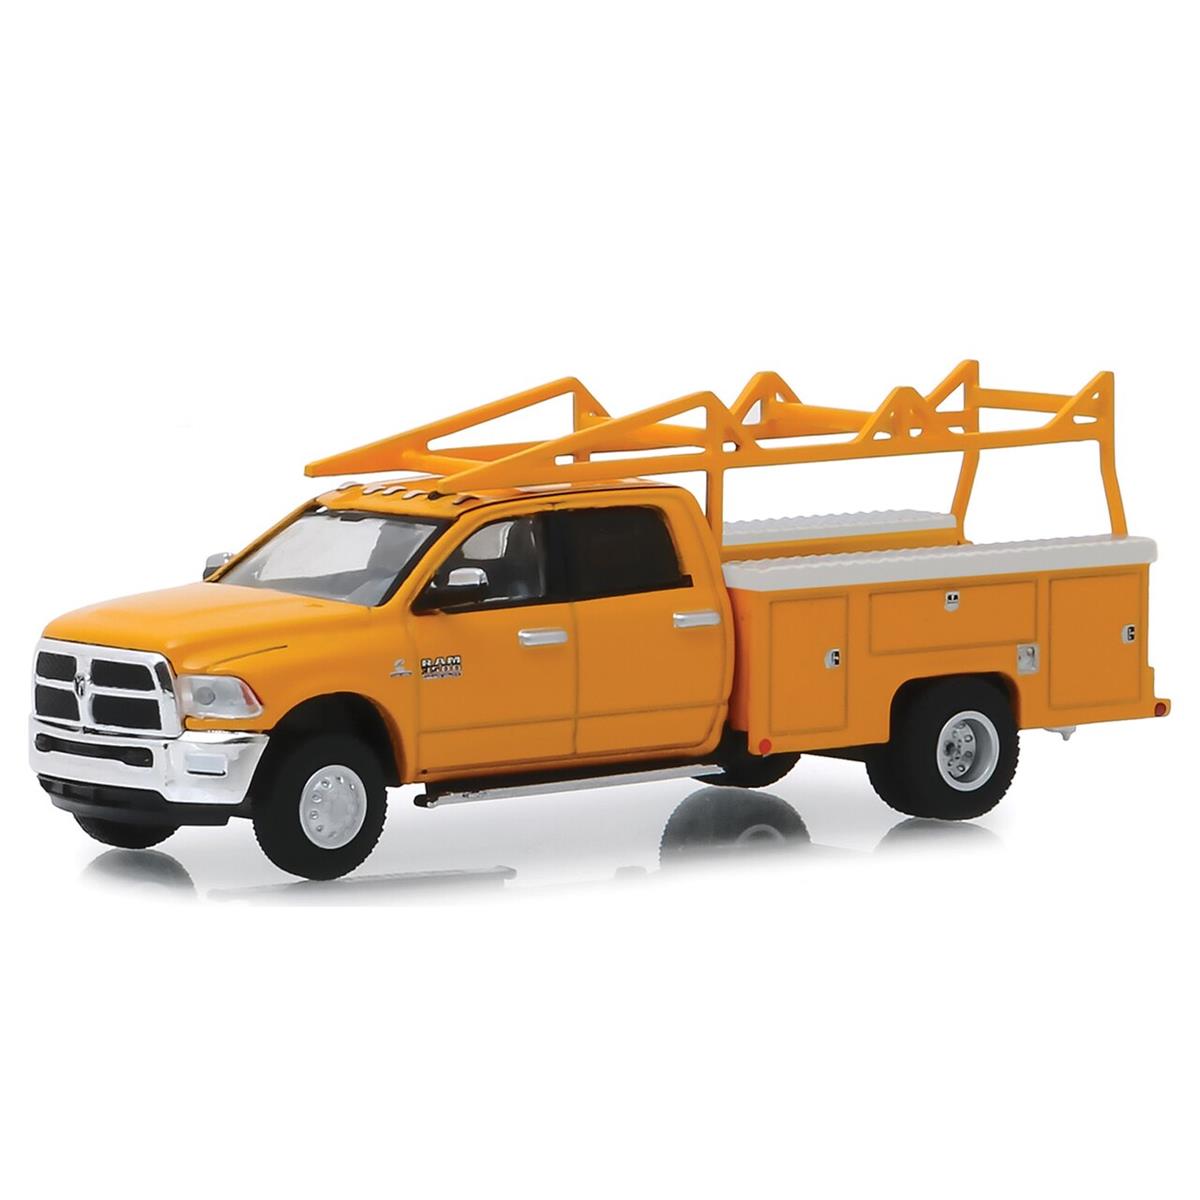 Greenlight 2018 Ram 3500 Dually Service Bed with Ladder Rack 1/64  | 㥹ȥ 㥹 ֤Τ   쥯 ߥ˥奢  ǥ륫 ߥ˥  ե ץ쥼